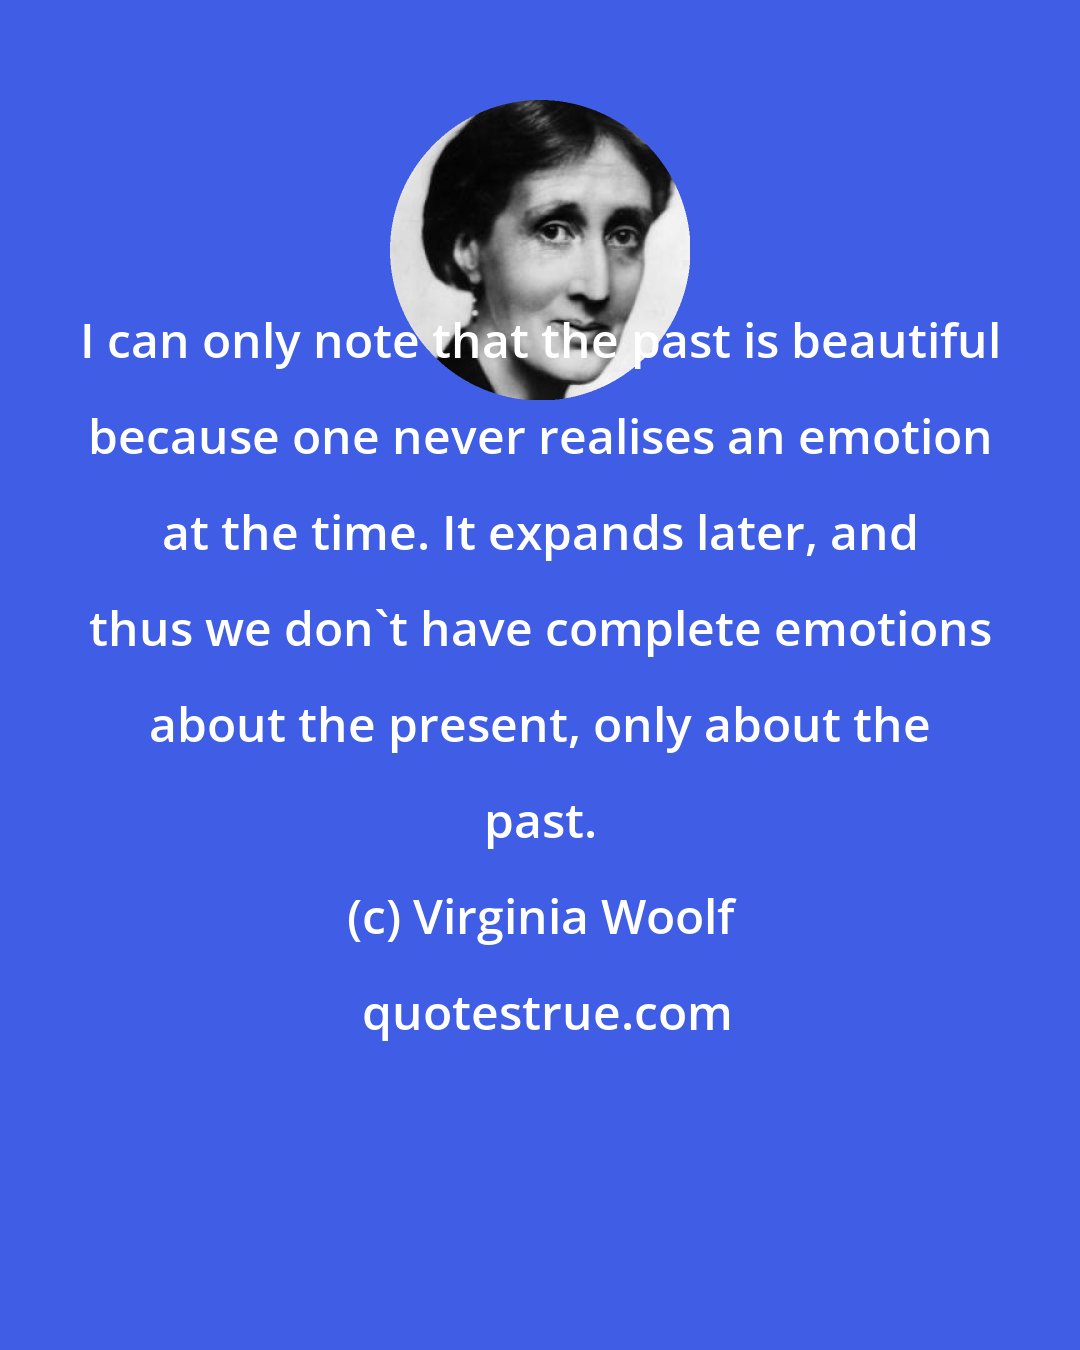 Virginia Woolf: I can only note that the past is beautiful because one never realises an emotion at the time. It expands later, and thus we don't have complete emotions about the present, only about the past.